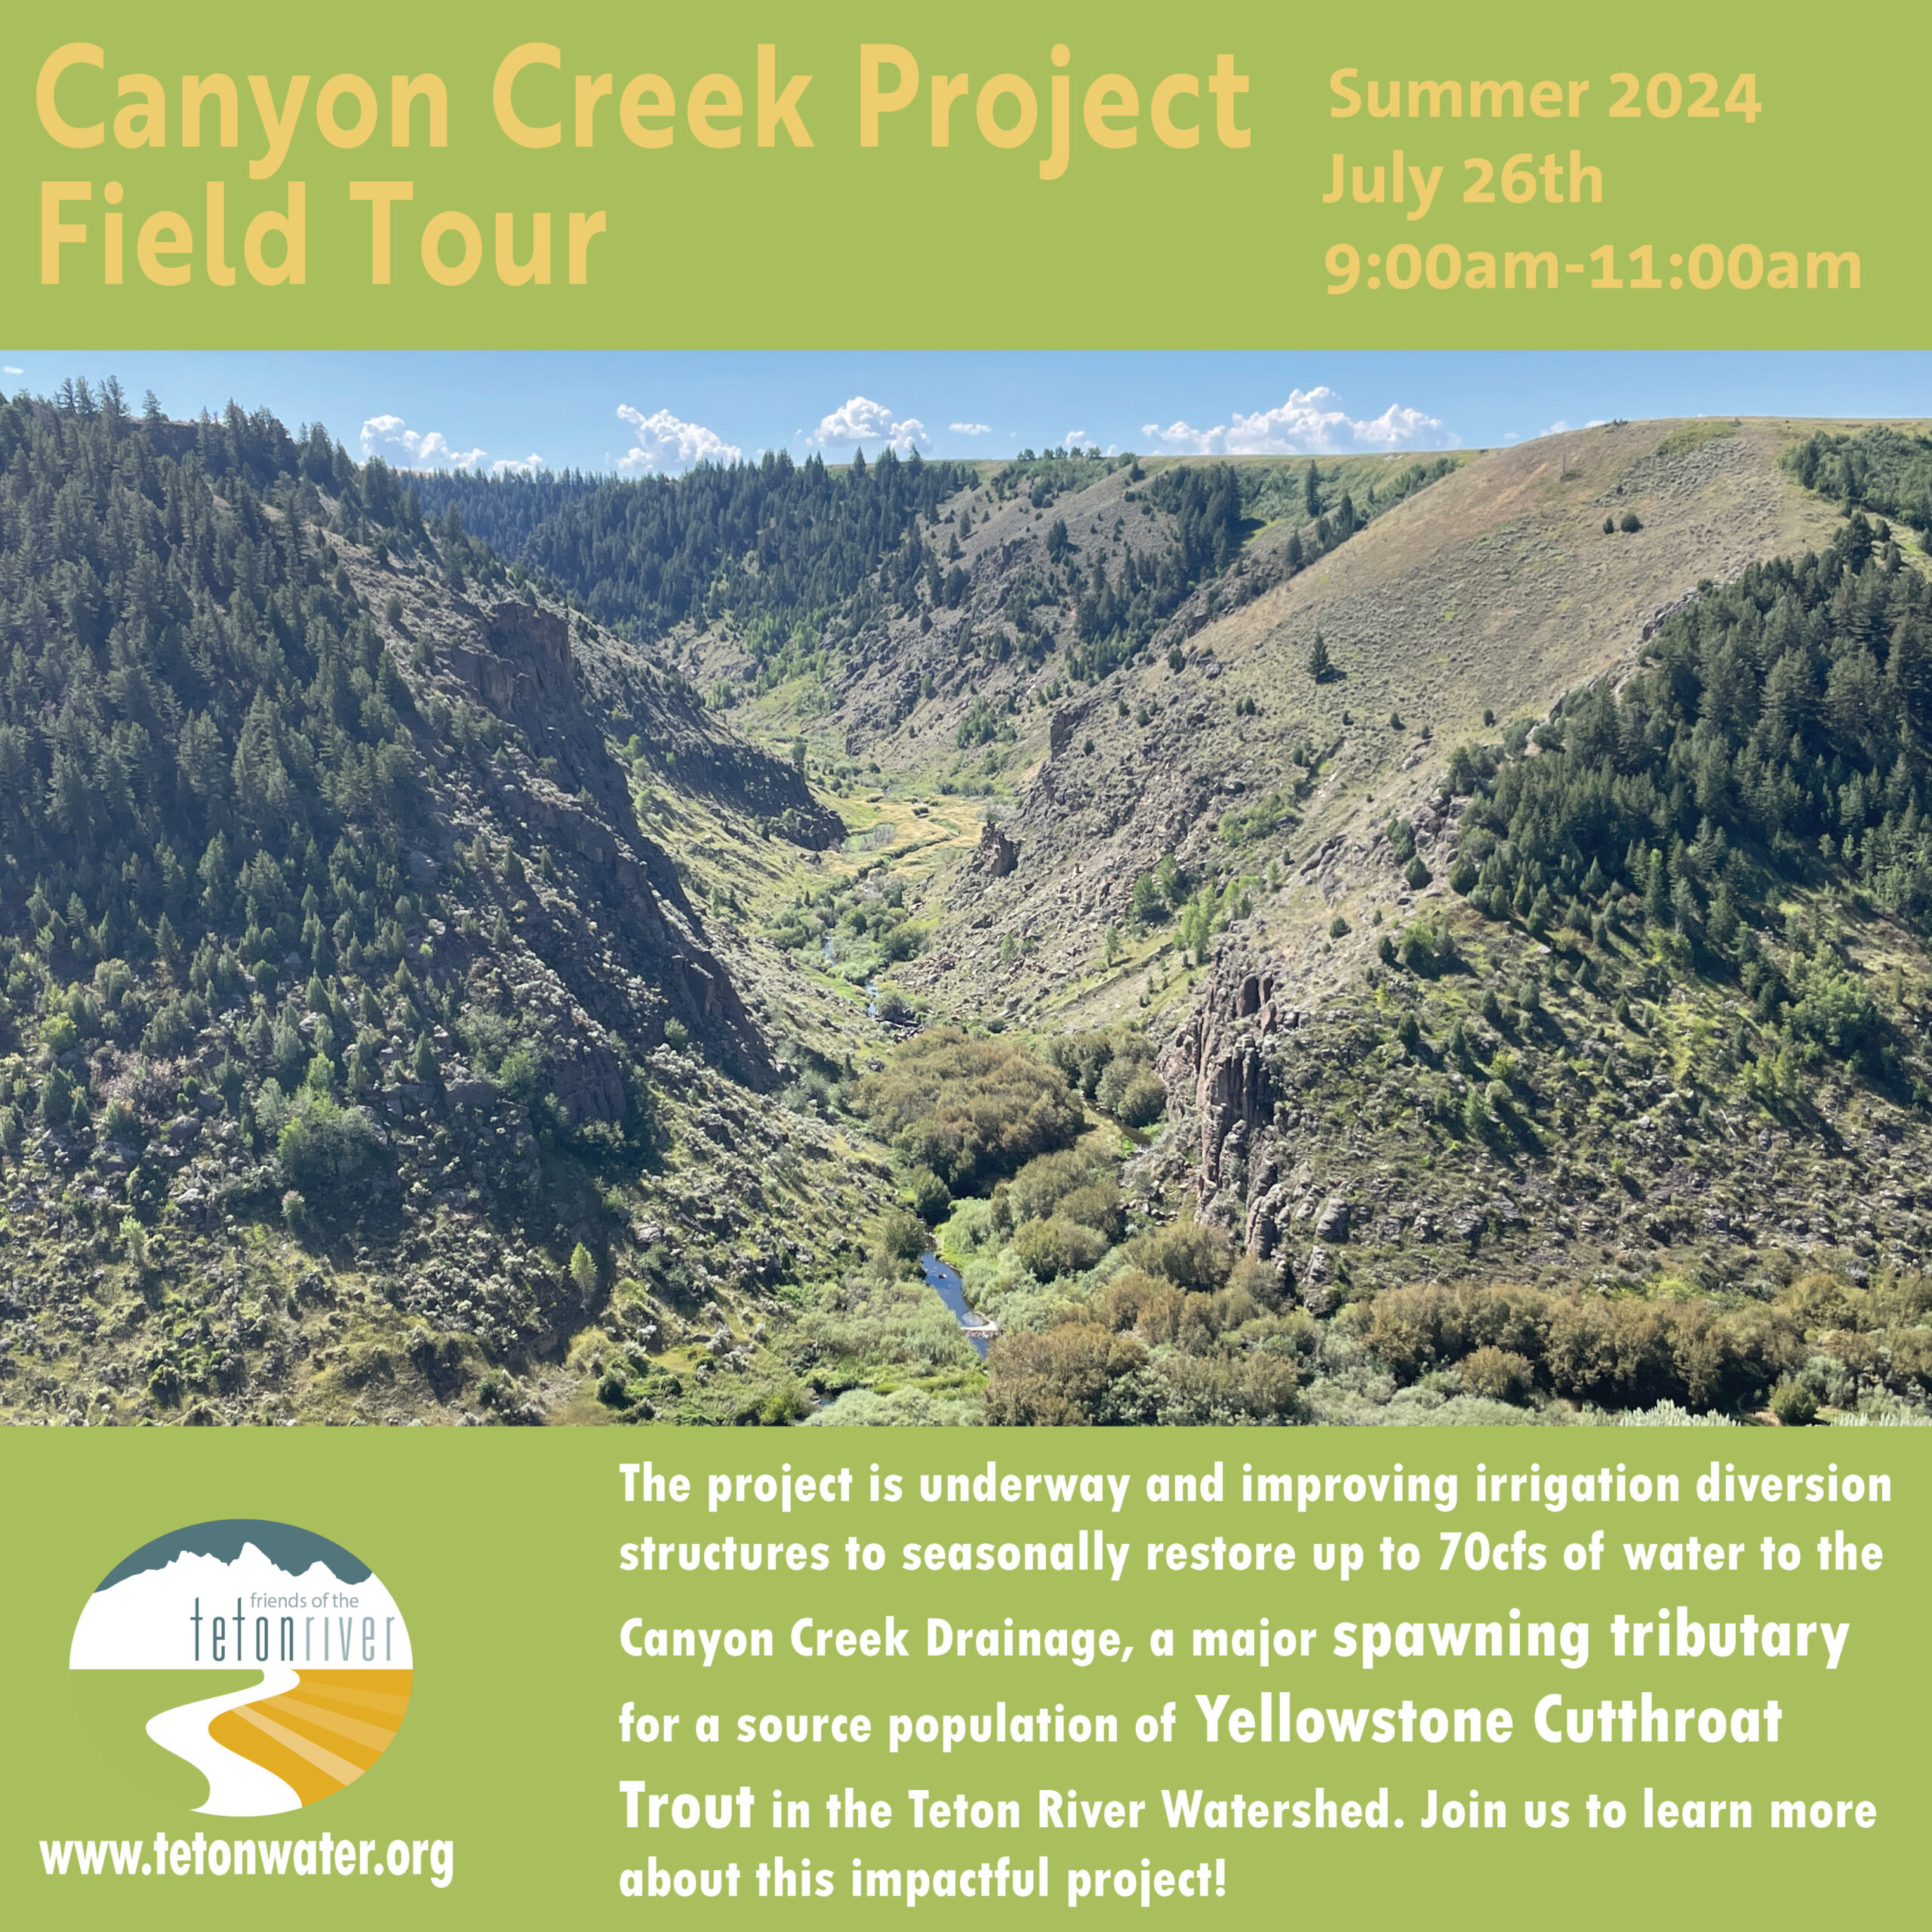 Canyon Creek Project Field Tour